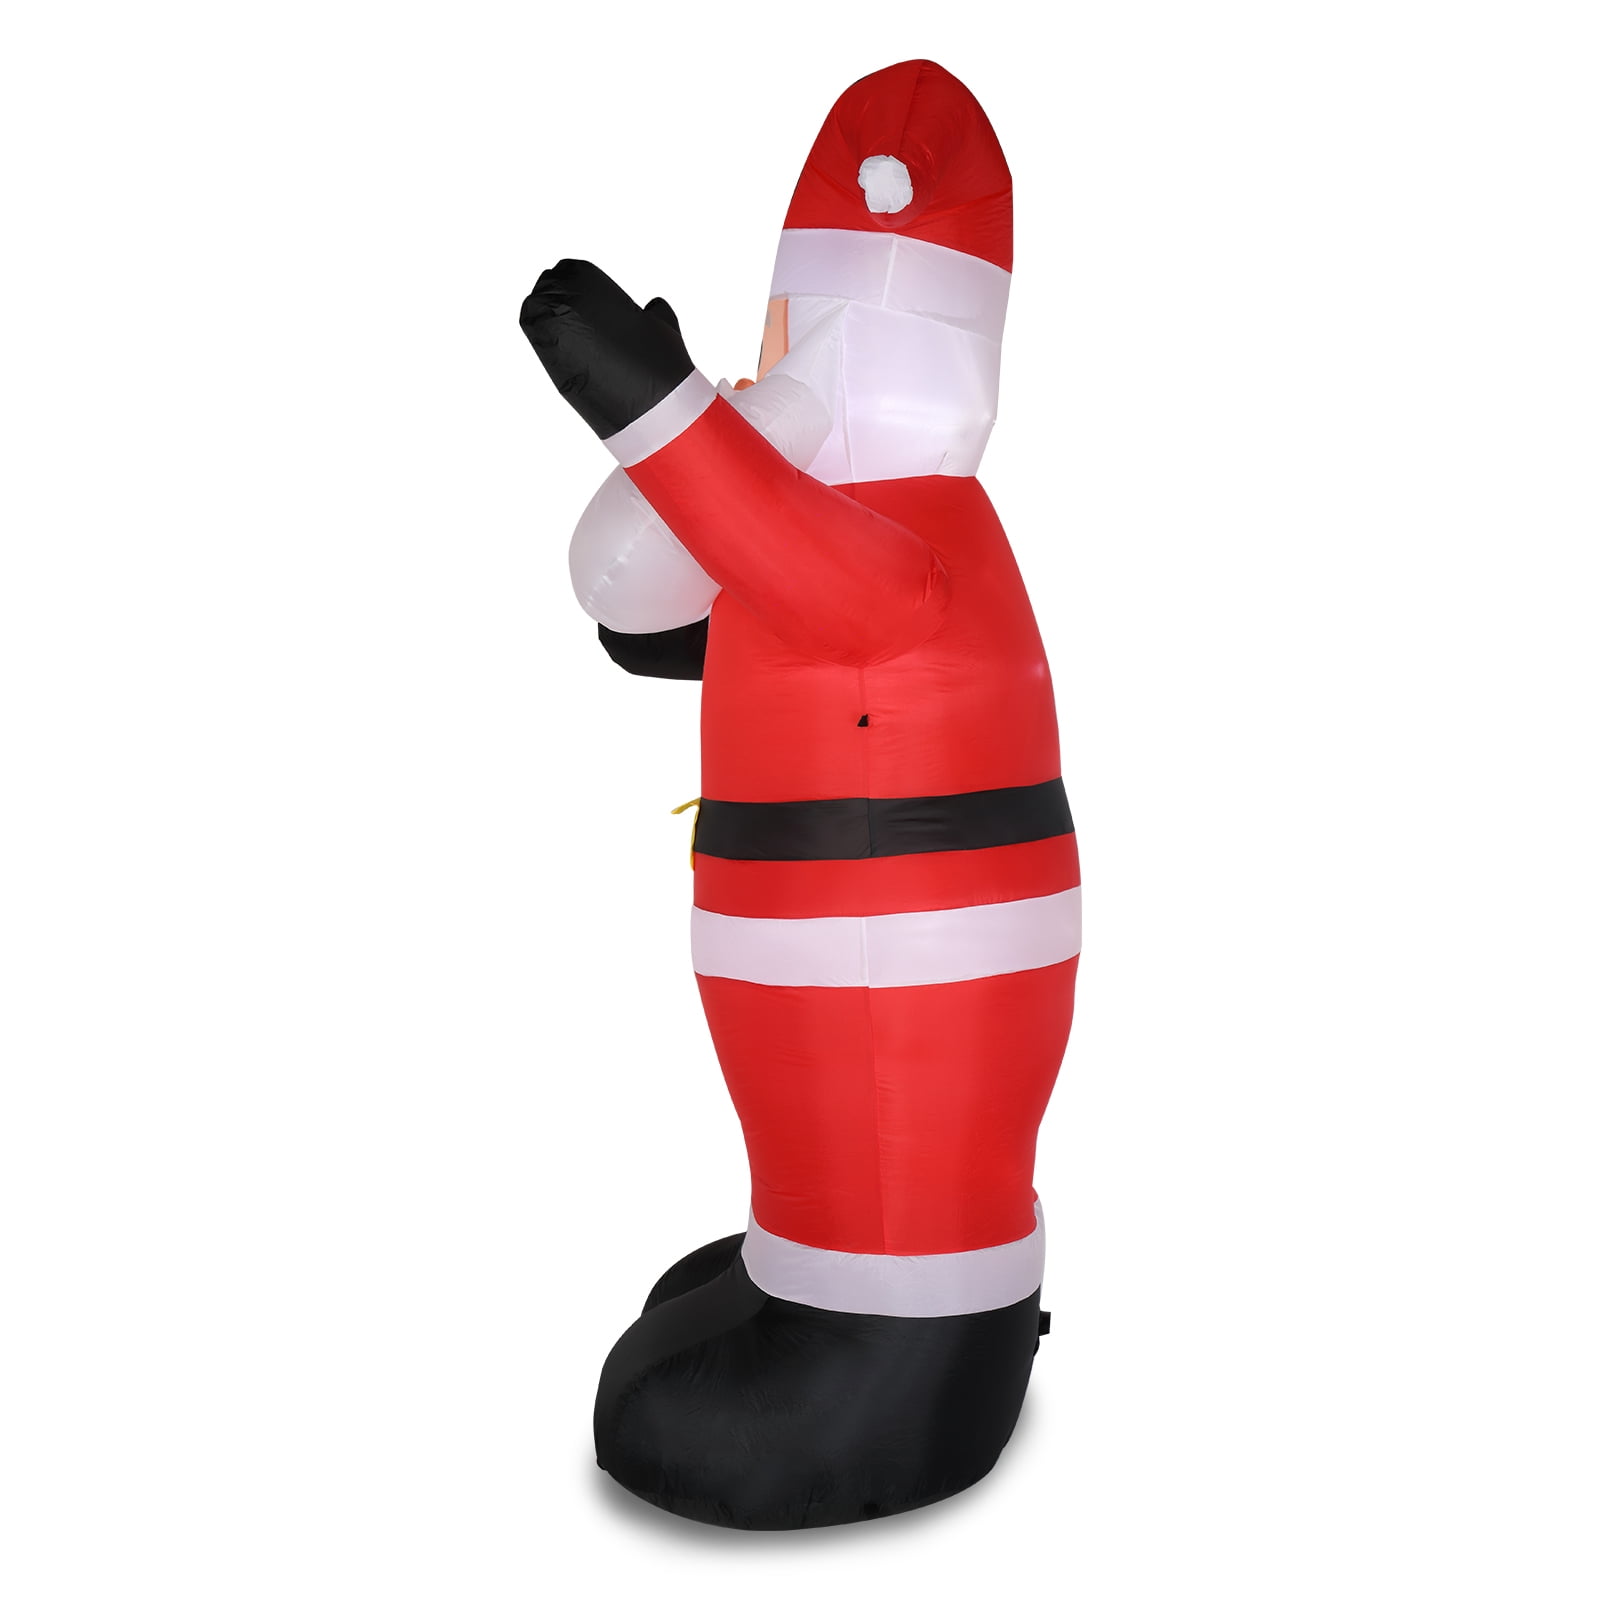 Resenkos 8 FT Giant Christmas Inflatables Santa Claus Decorations, Blow Up Santa Claus with 4 String Lights for Yard Garden Lawn Porch Xmas Holiday Party